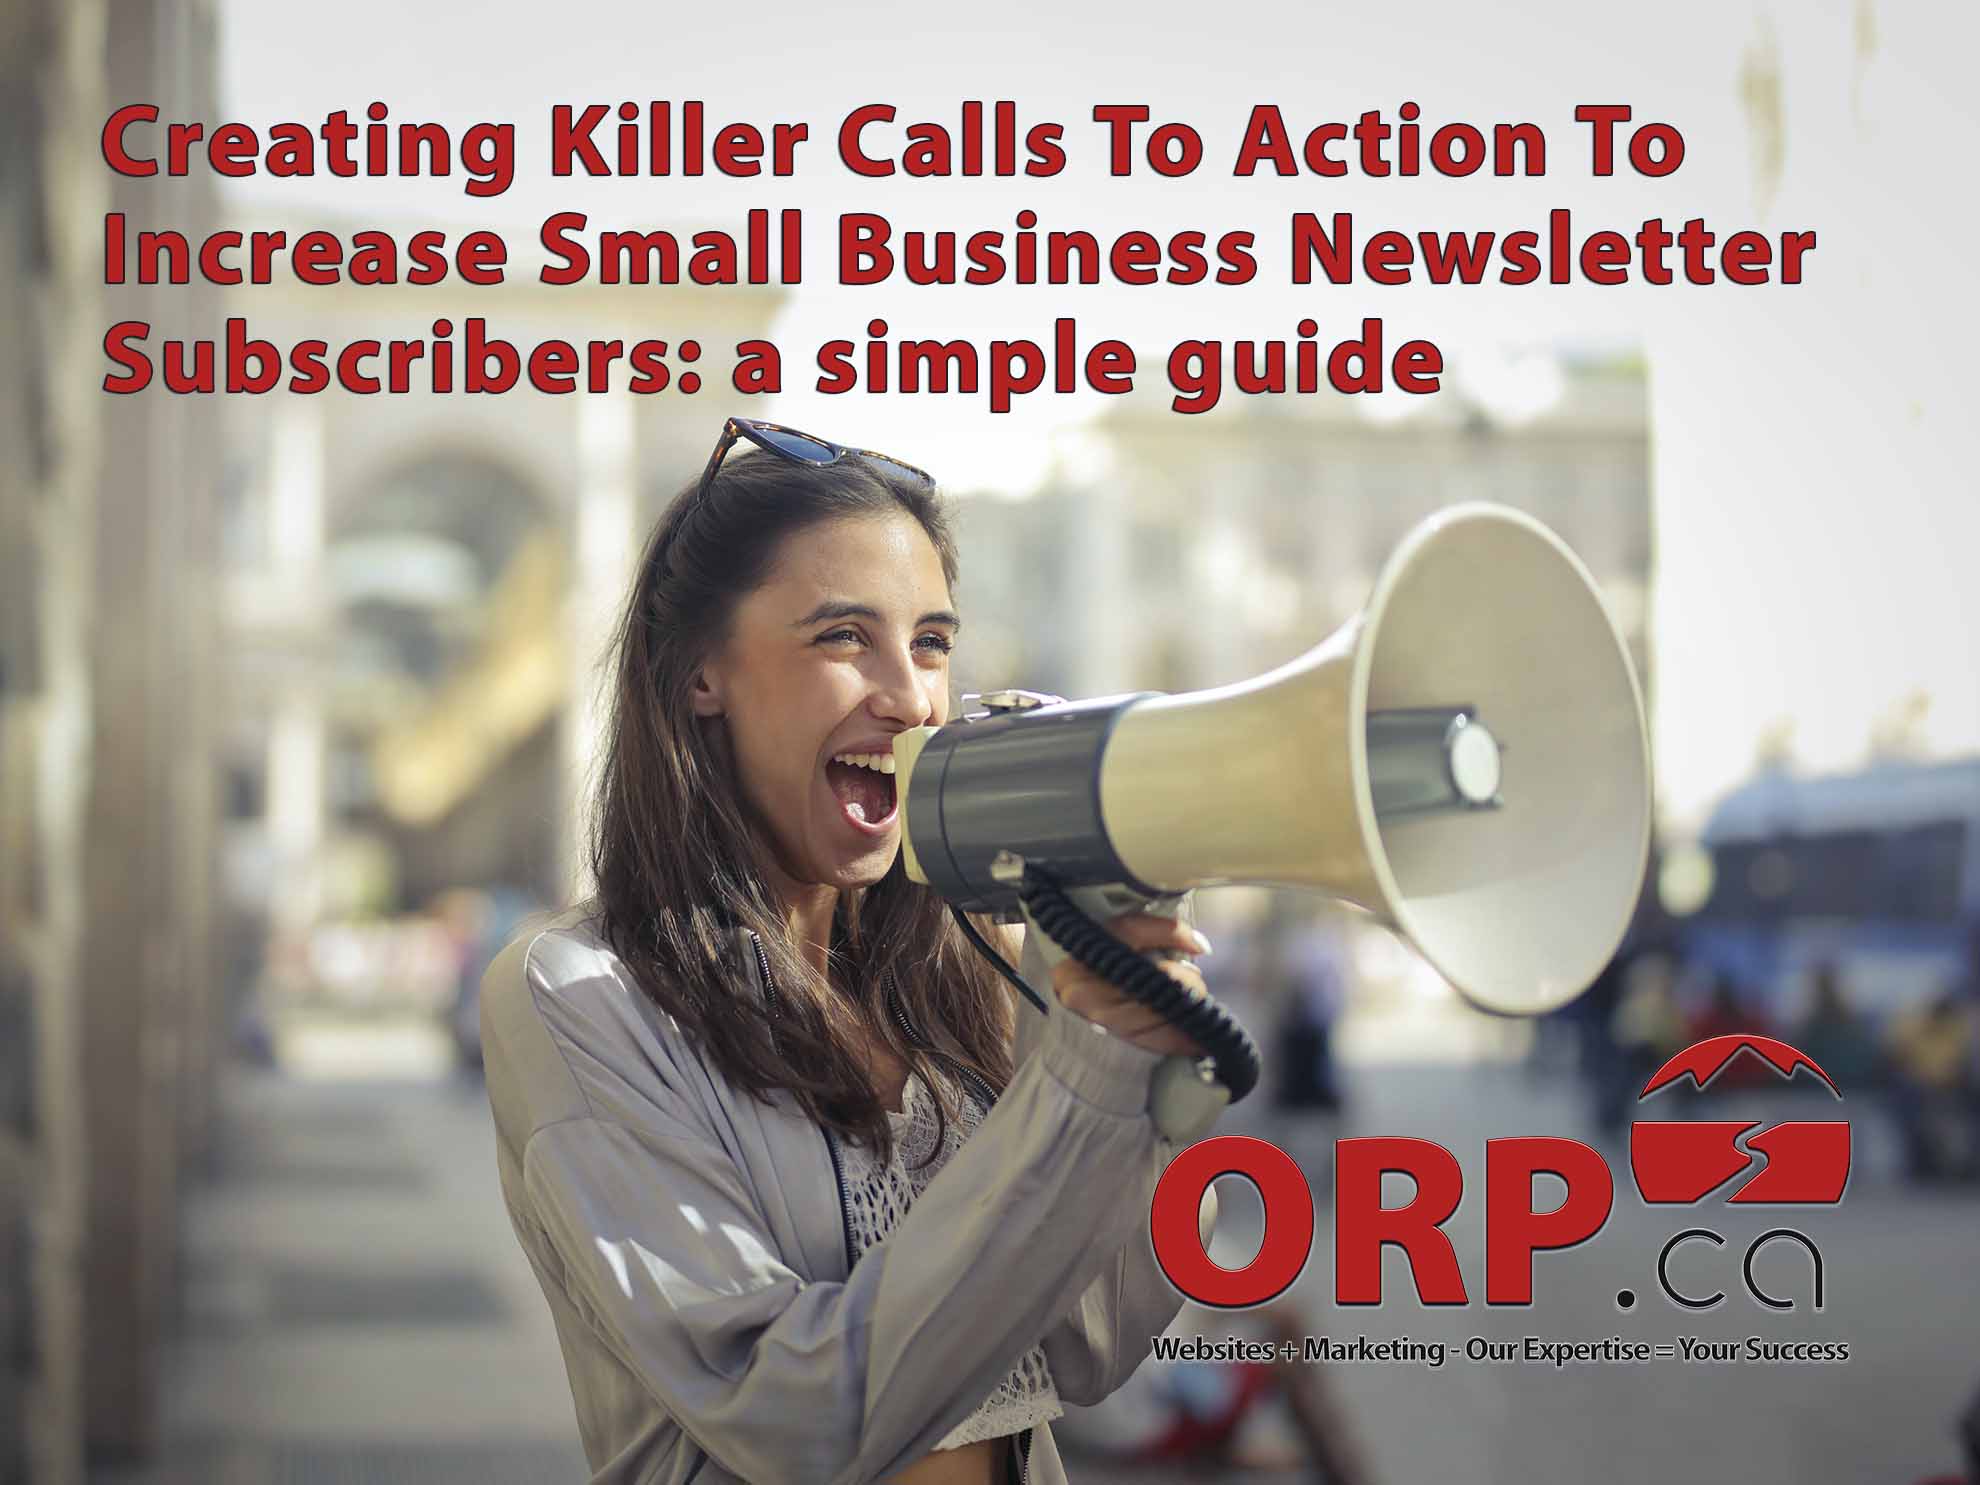 Creating Killer Calls To Action To Increase Small Business Newsletter Subscribers a simple guide from ORP.ca Websites + Marketing: Our Expertise  = Your Success - Services for Small Business and Business Professionals&quot;